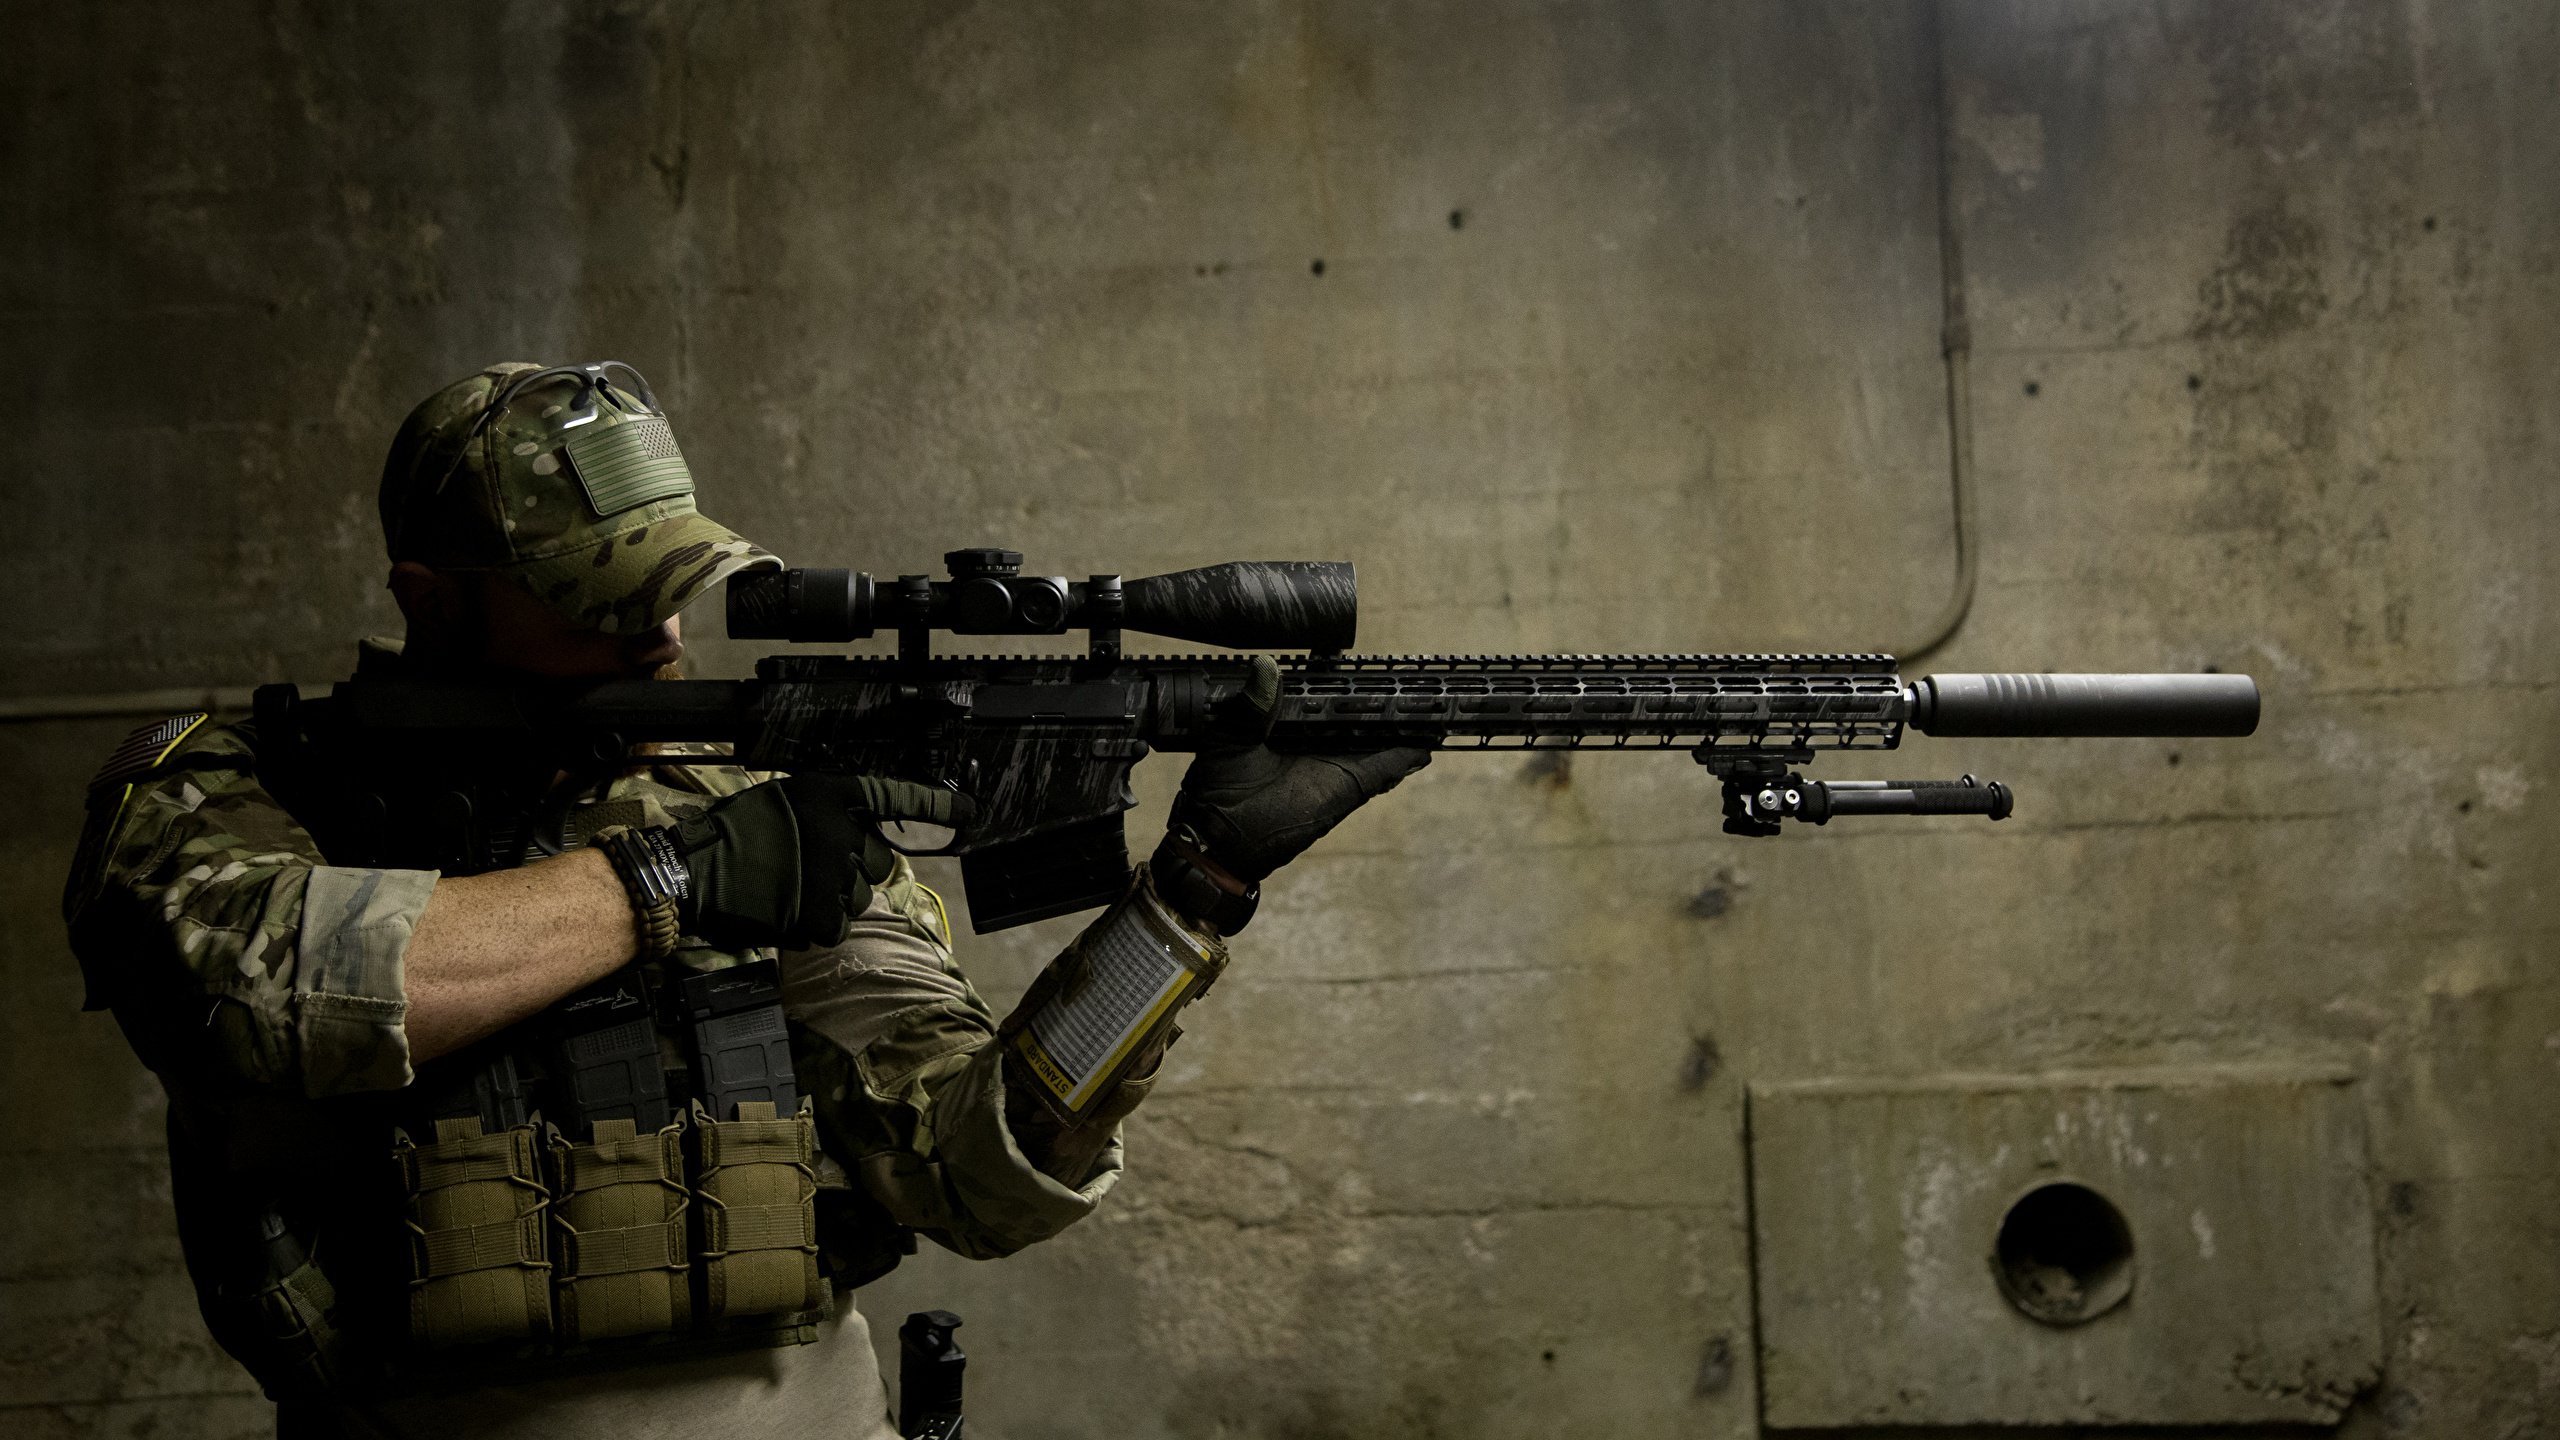 Wallpaper Sniper rifle Snipers Soldiers Army 2560x1440